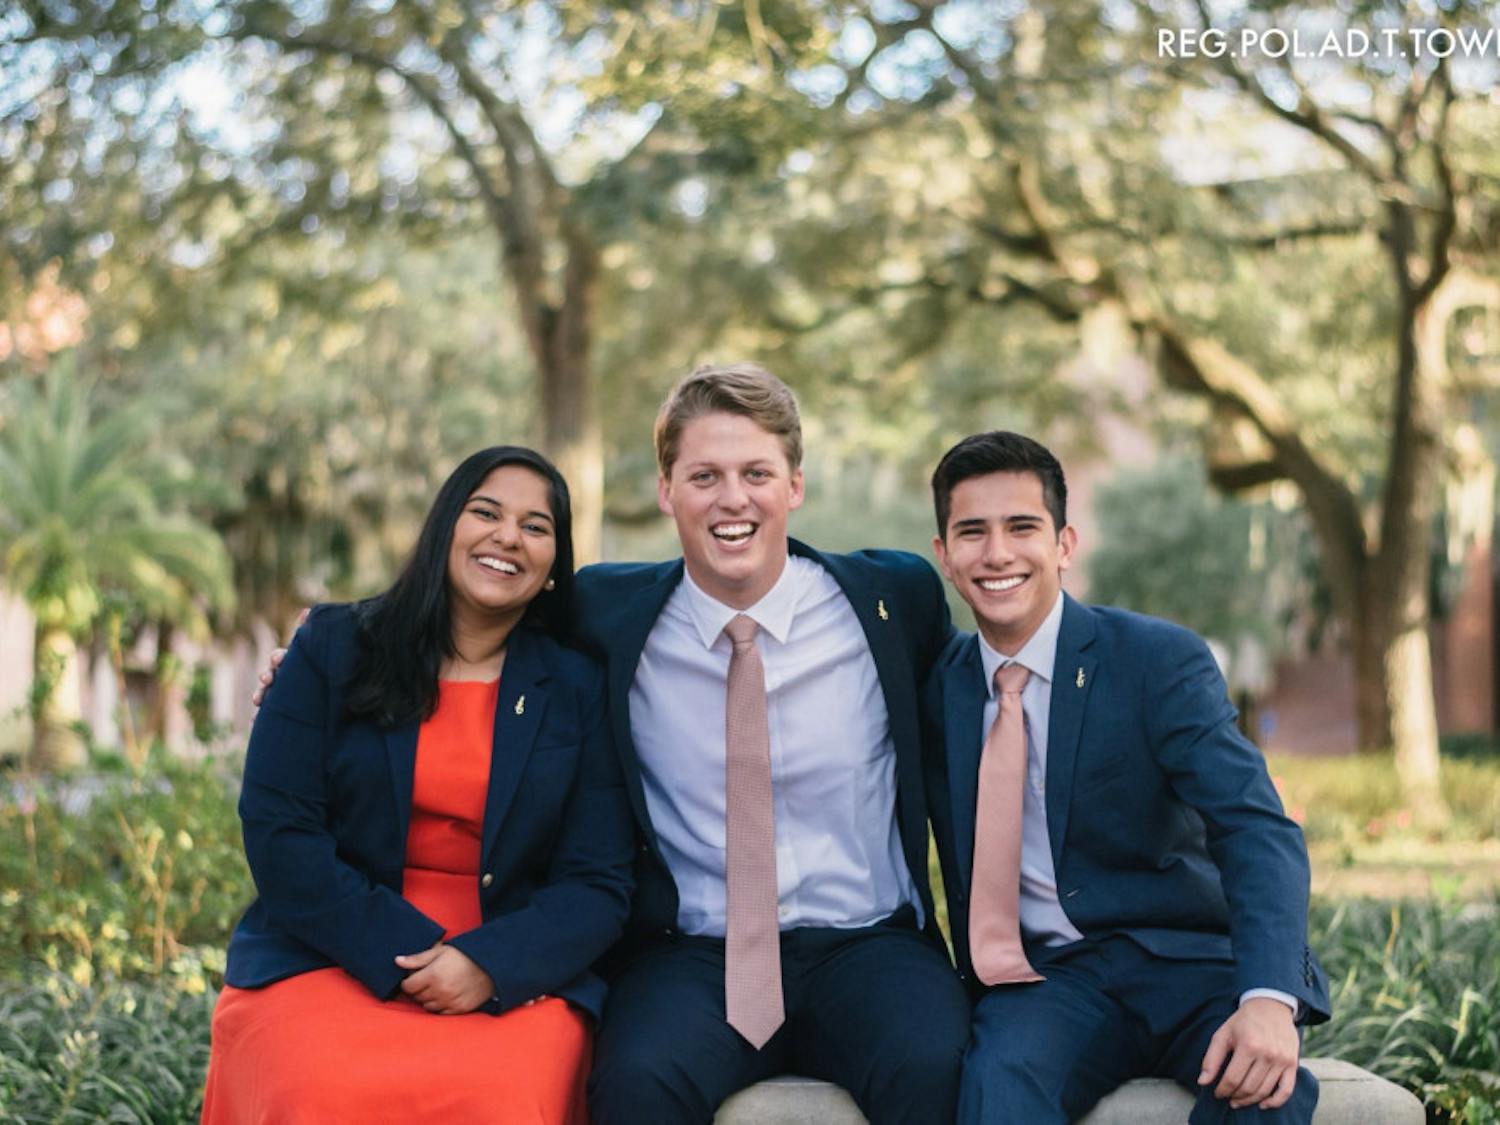 Impact Party's executive ticket consists of Michael Murphy, 21, for Student Body president (center); Sarah Abraham, 20, for Student Body vice president (left); and Santiago Gutierrez, 20, for Student Body treasurer (right).